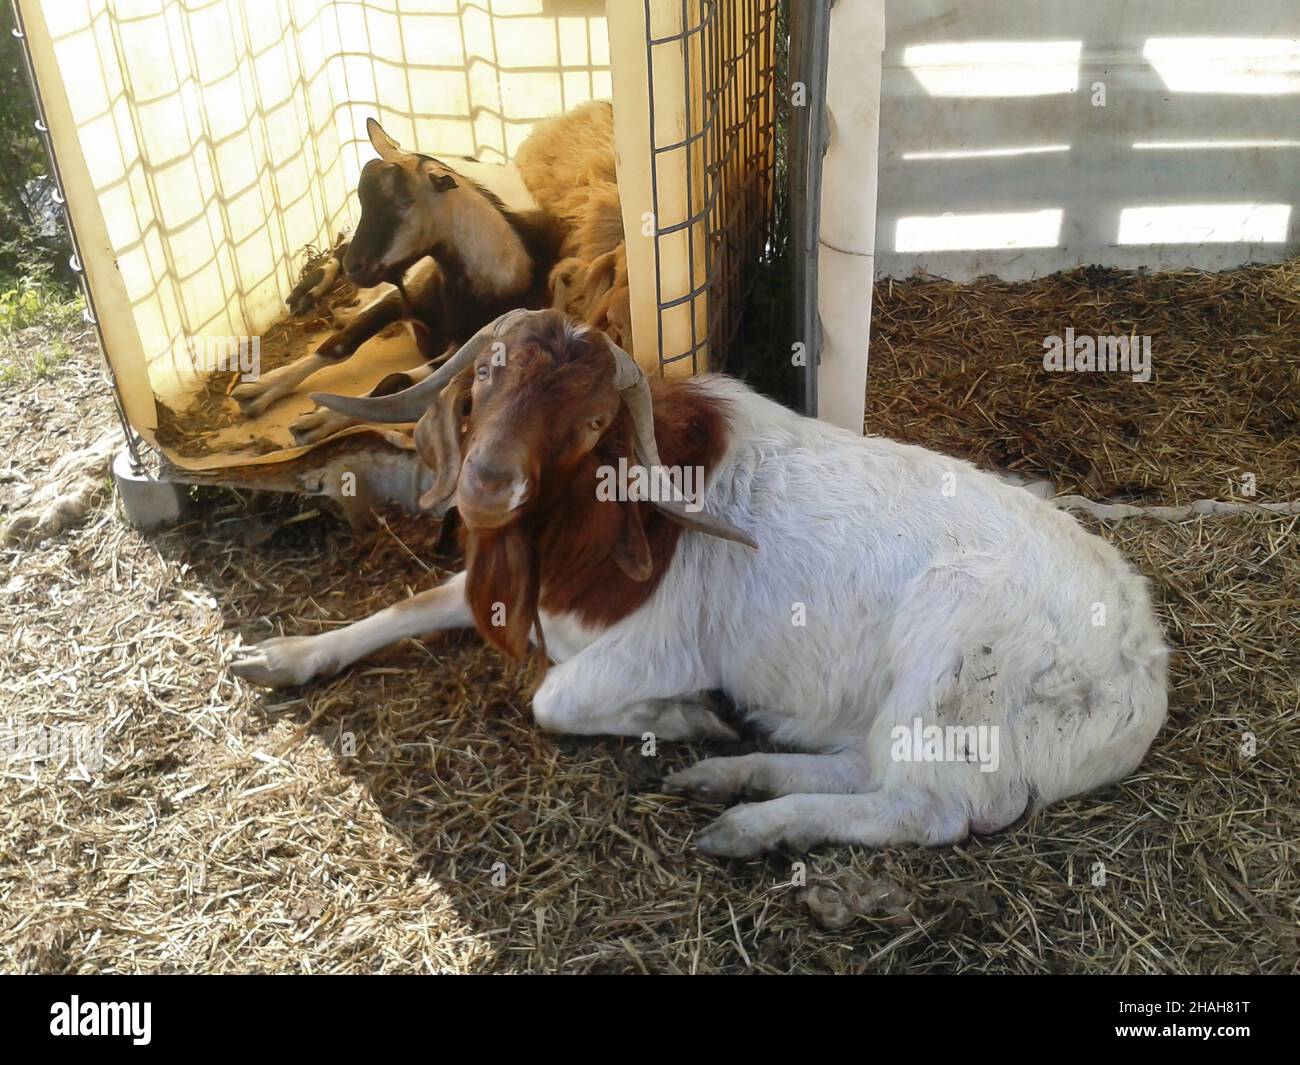 Animals from the farm two goats lie in the summer outdoors near the corral in the shade Stock Photo